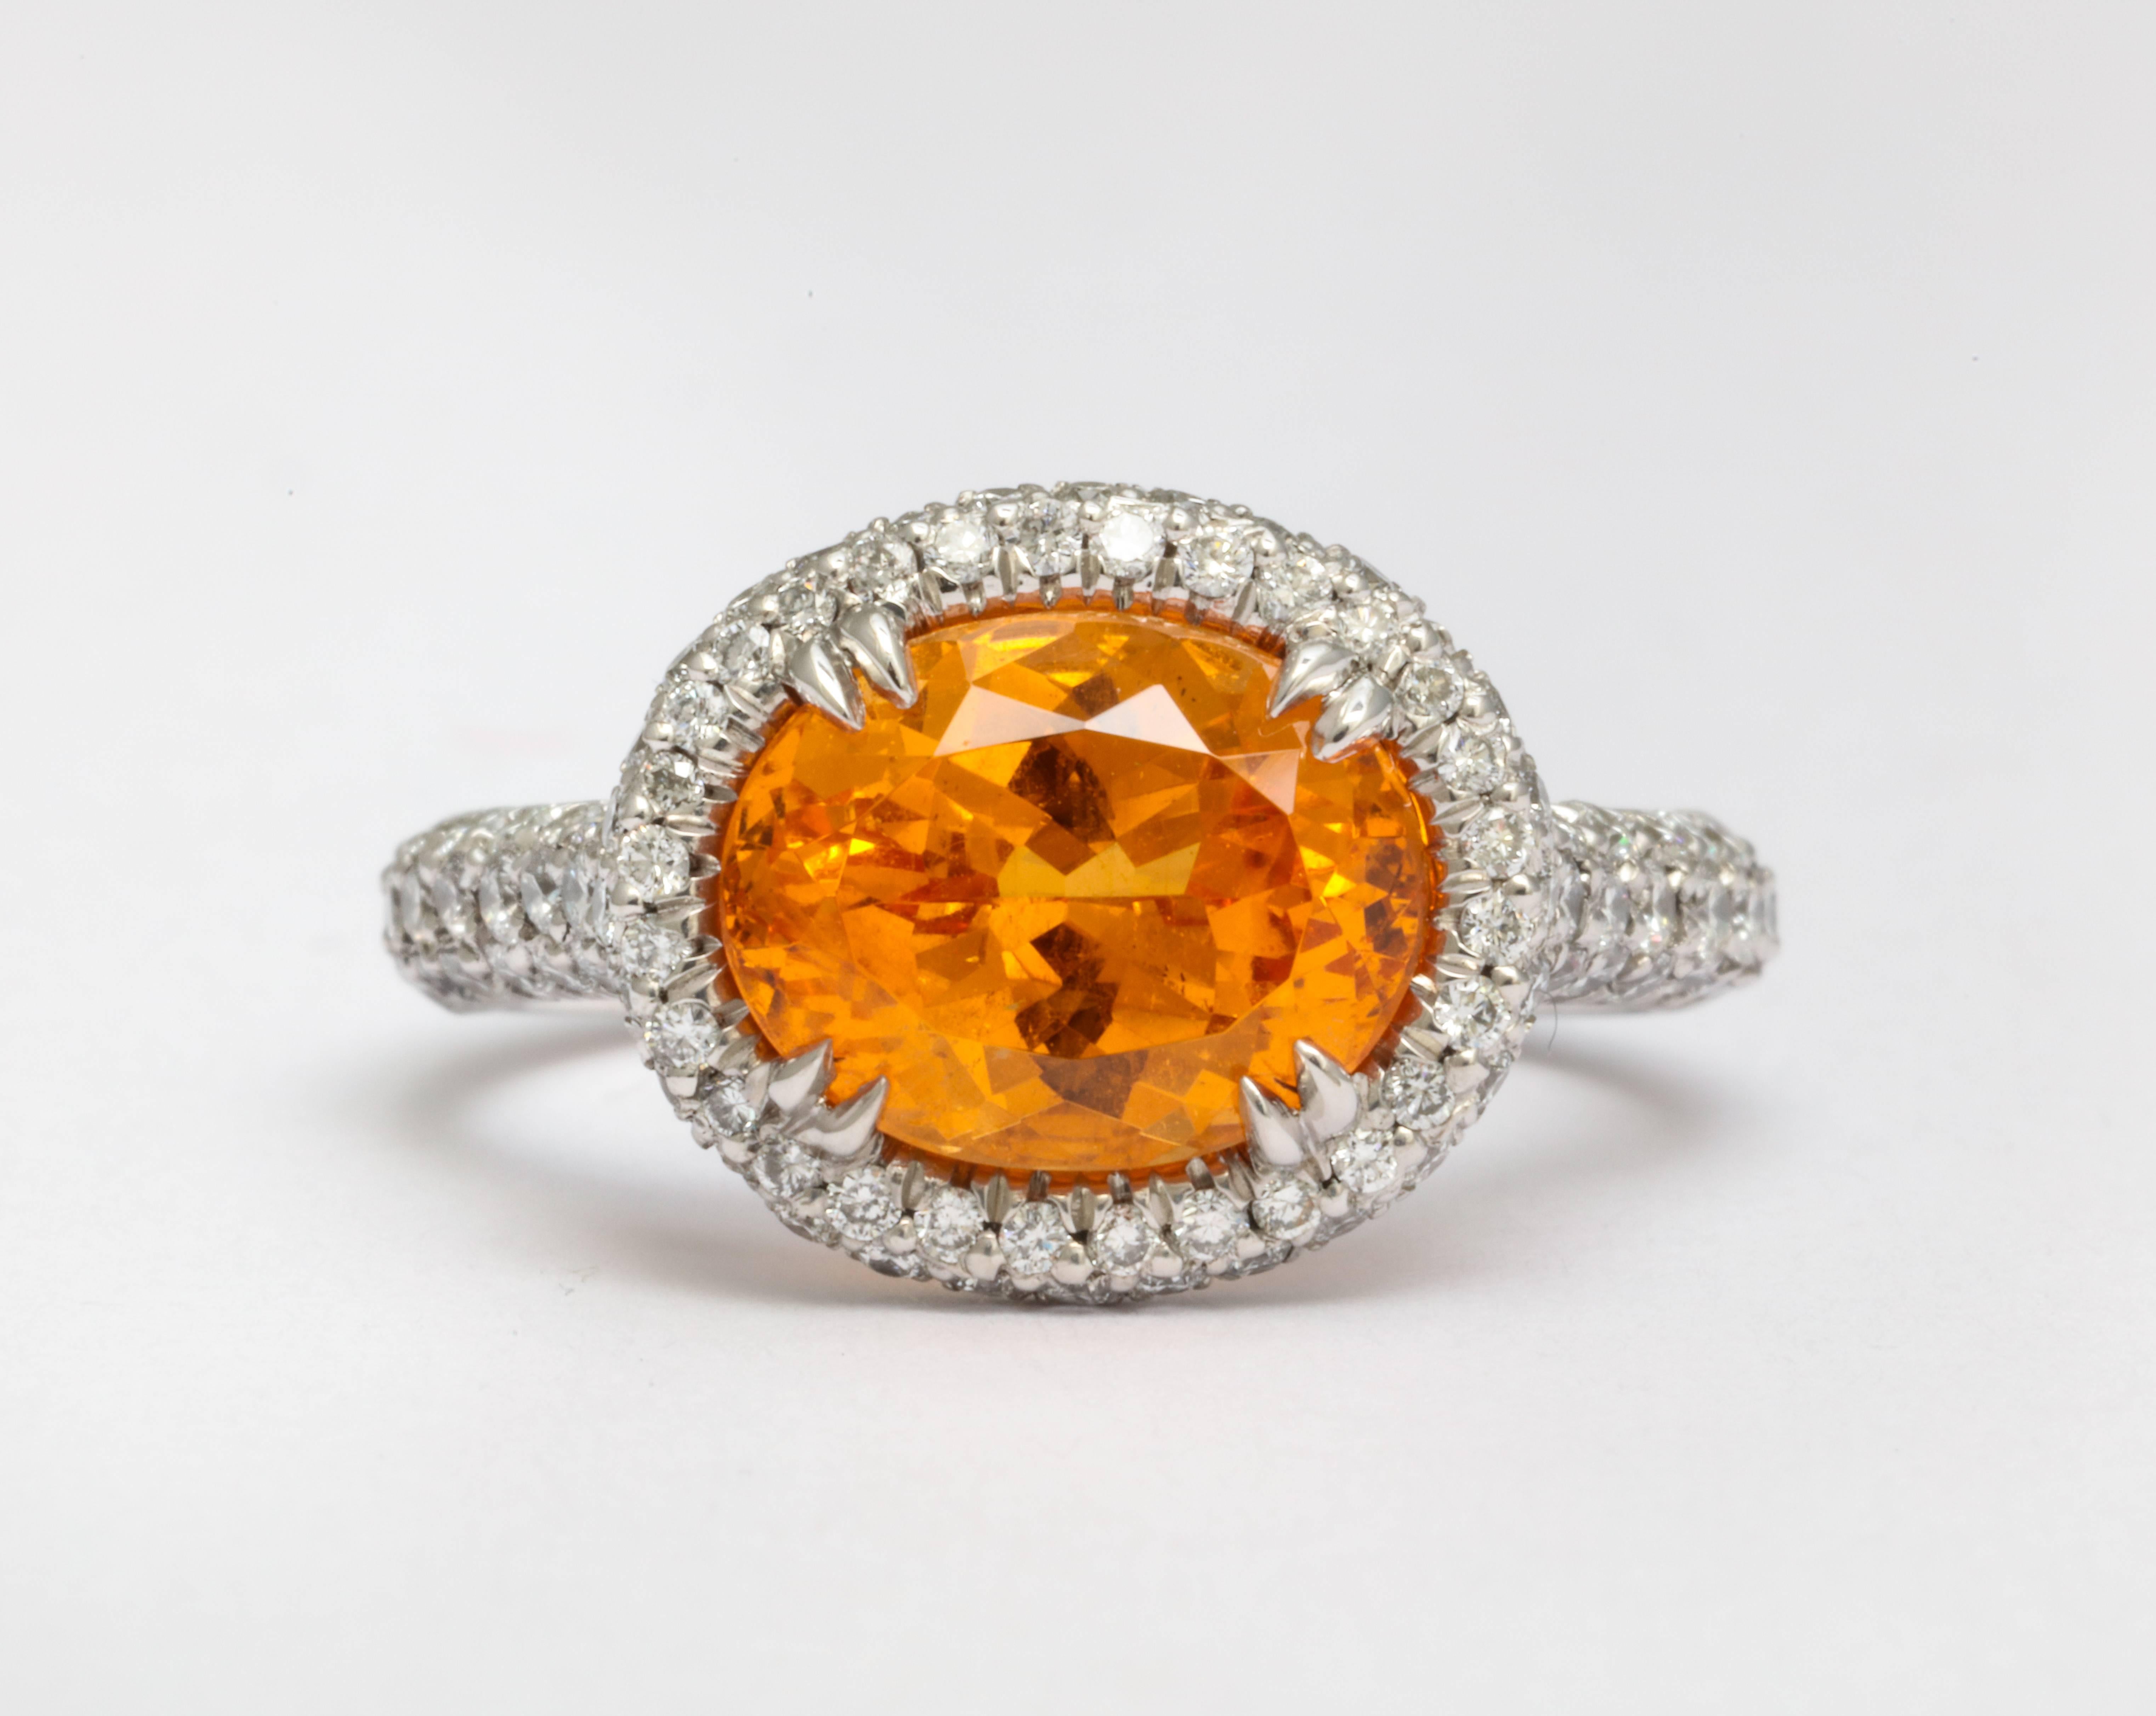 A vivid orange, crystal clean garnet gem. Skillfully crafted platinum ring featuring an oval brilliant cut 3.99 carat mandarin garnet.  Also known as Spessartite, with micro pavé-set diamonds for a rolled affect setting. Total weight of diamonds is